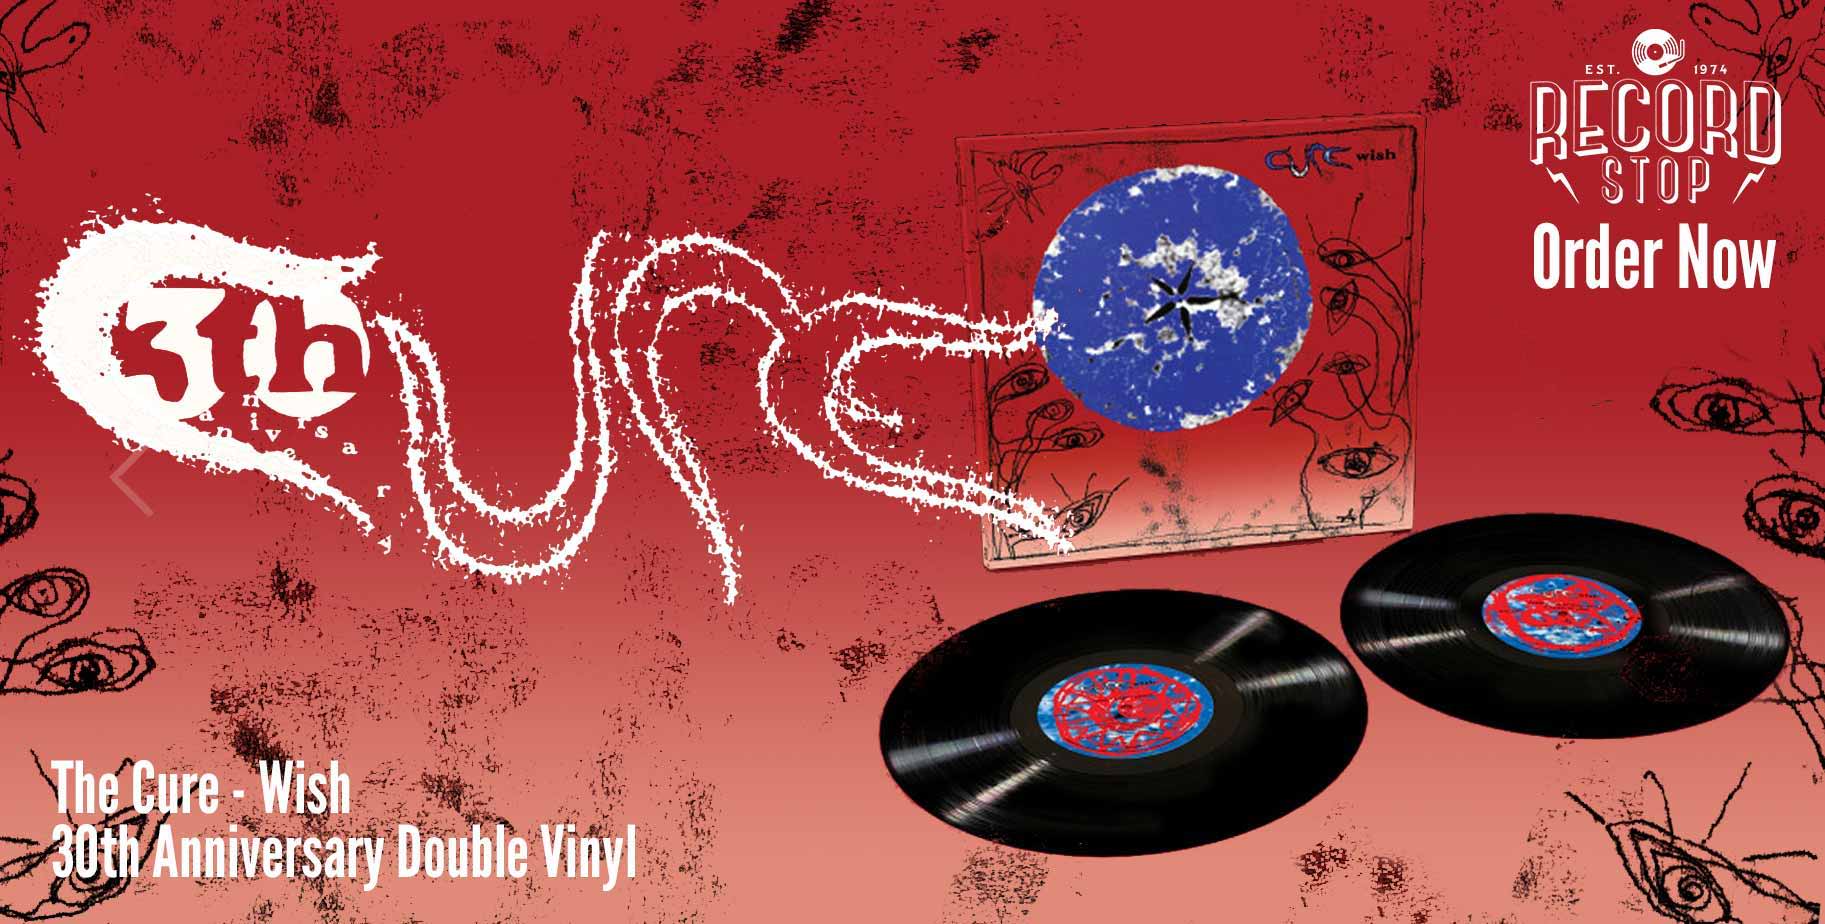 The Cure Wish 30th Anniversary Double Vinyl